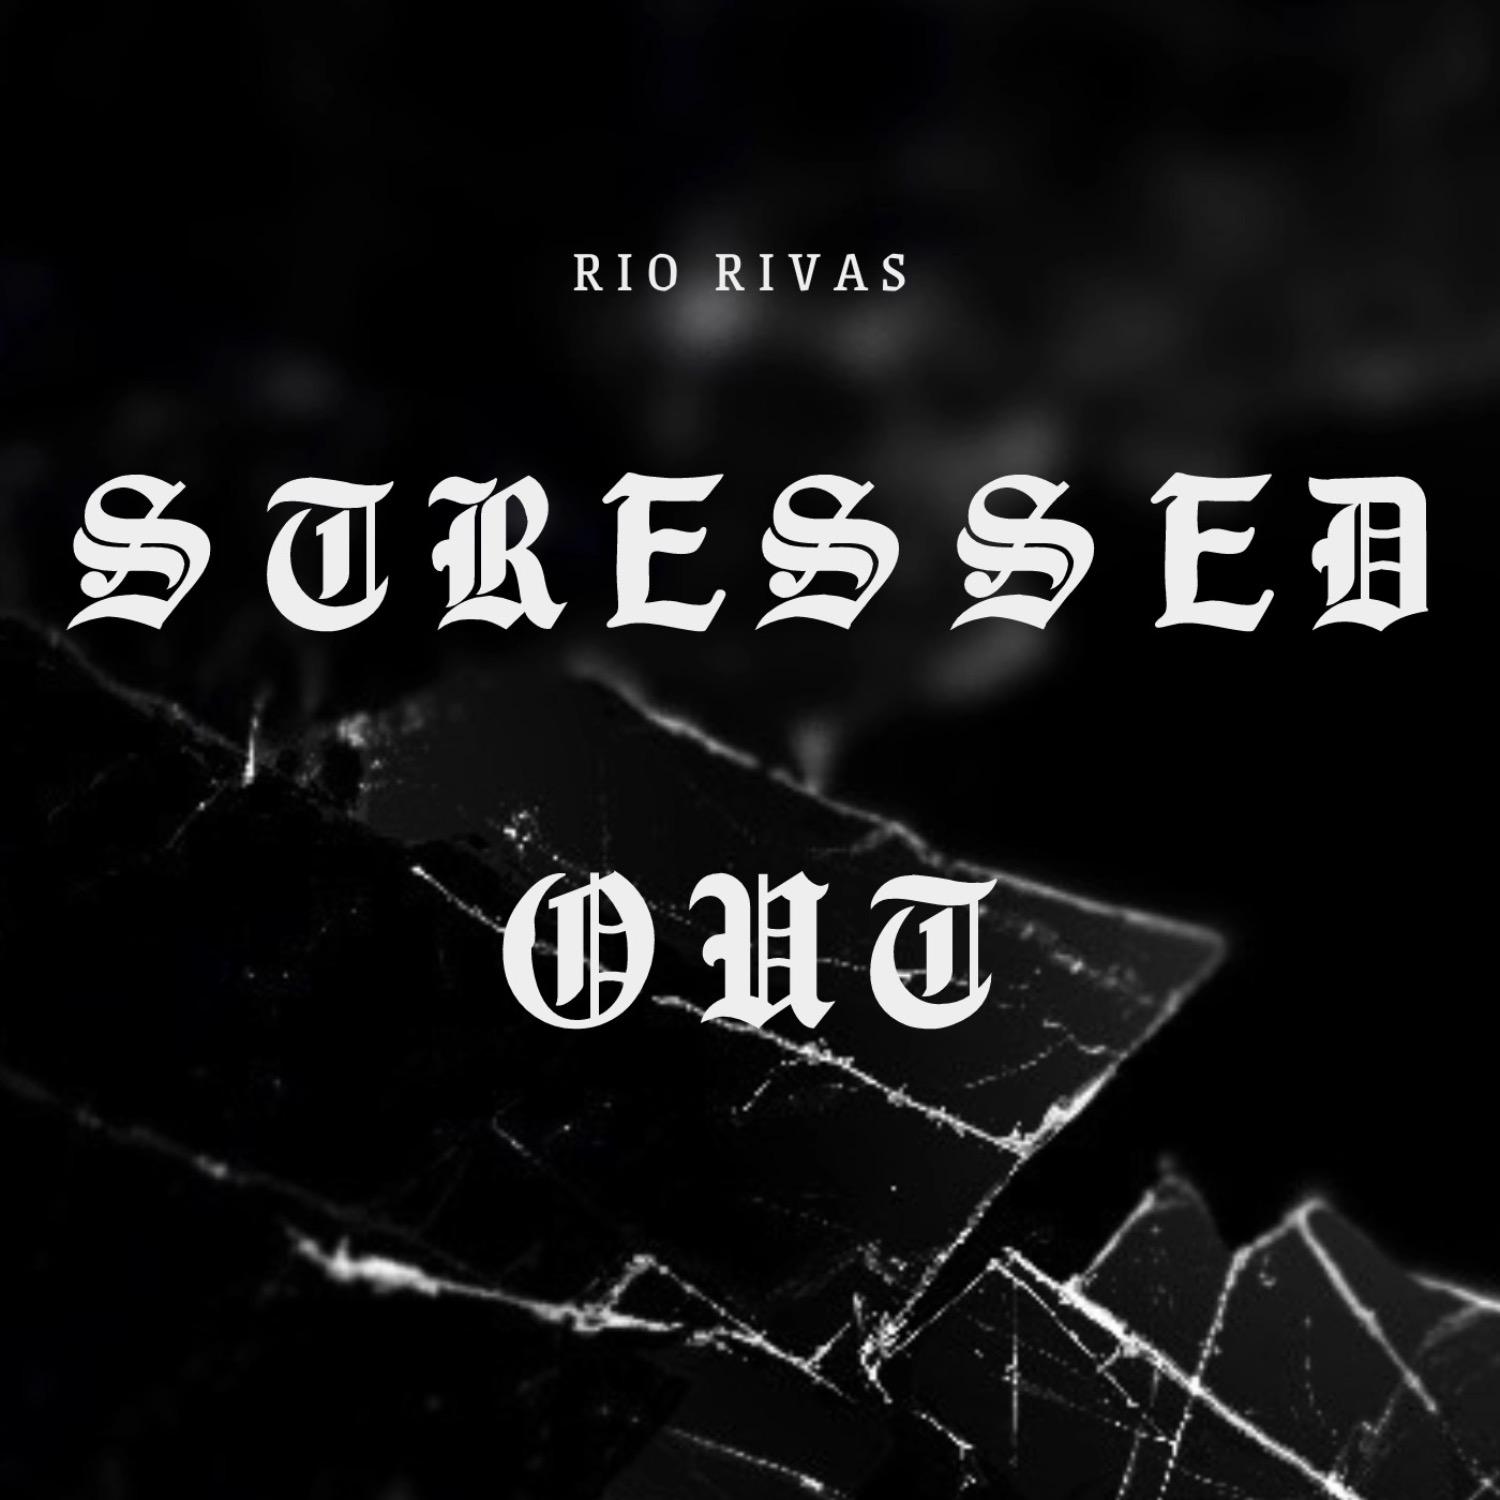 Постер альбома Stressed Out